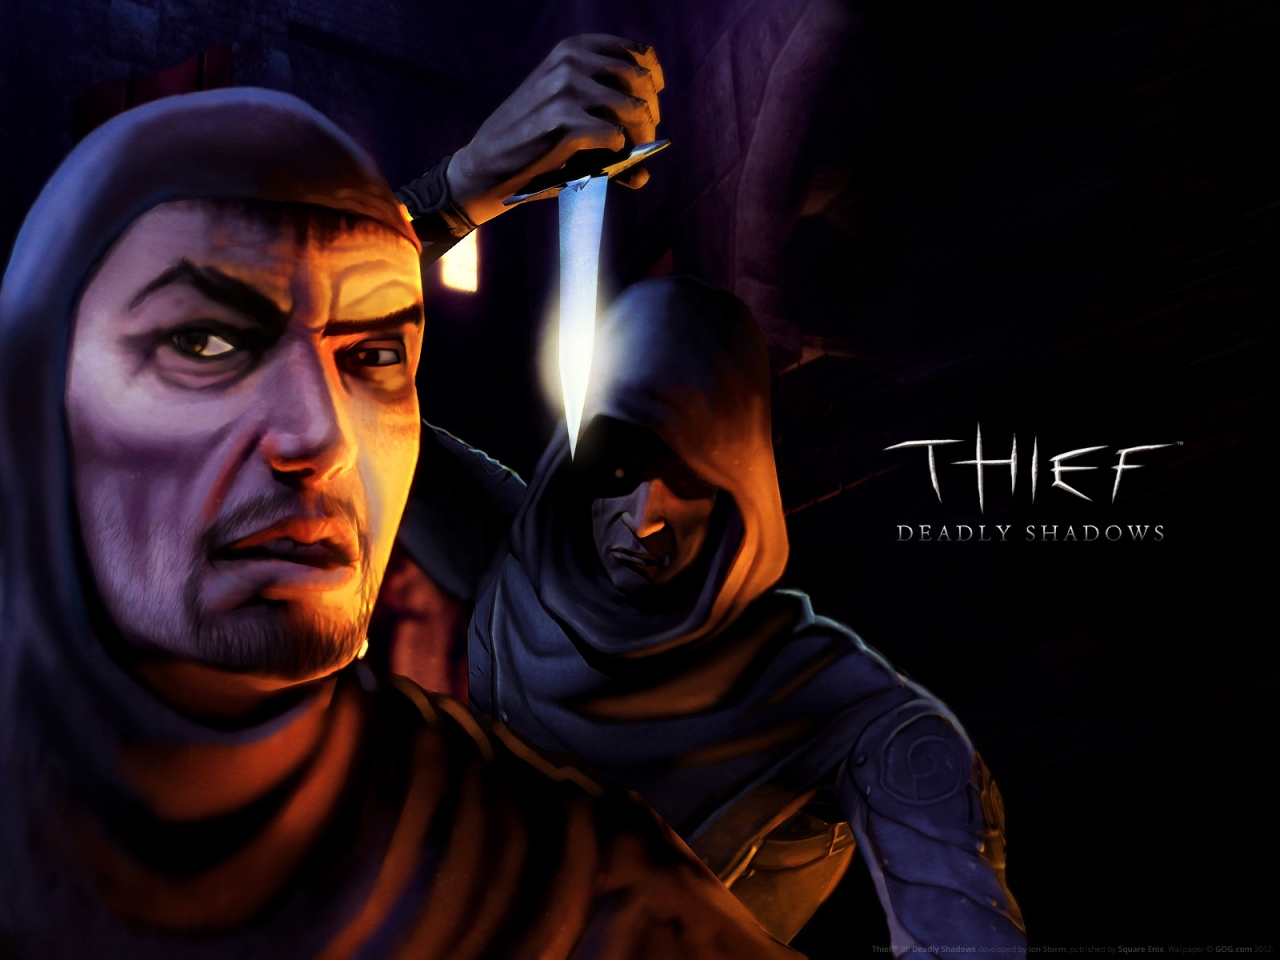 Thief Deadly Shadows for 1280 x 960 resolution